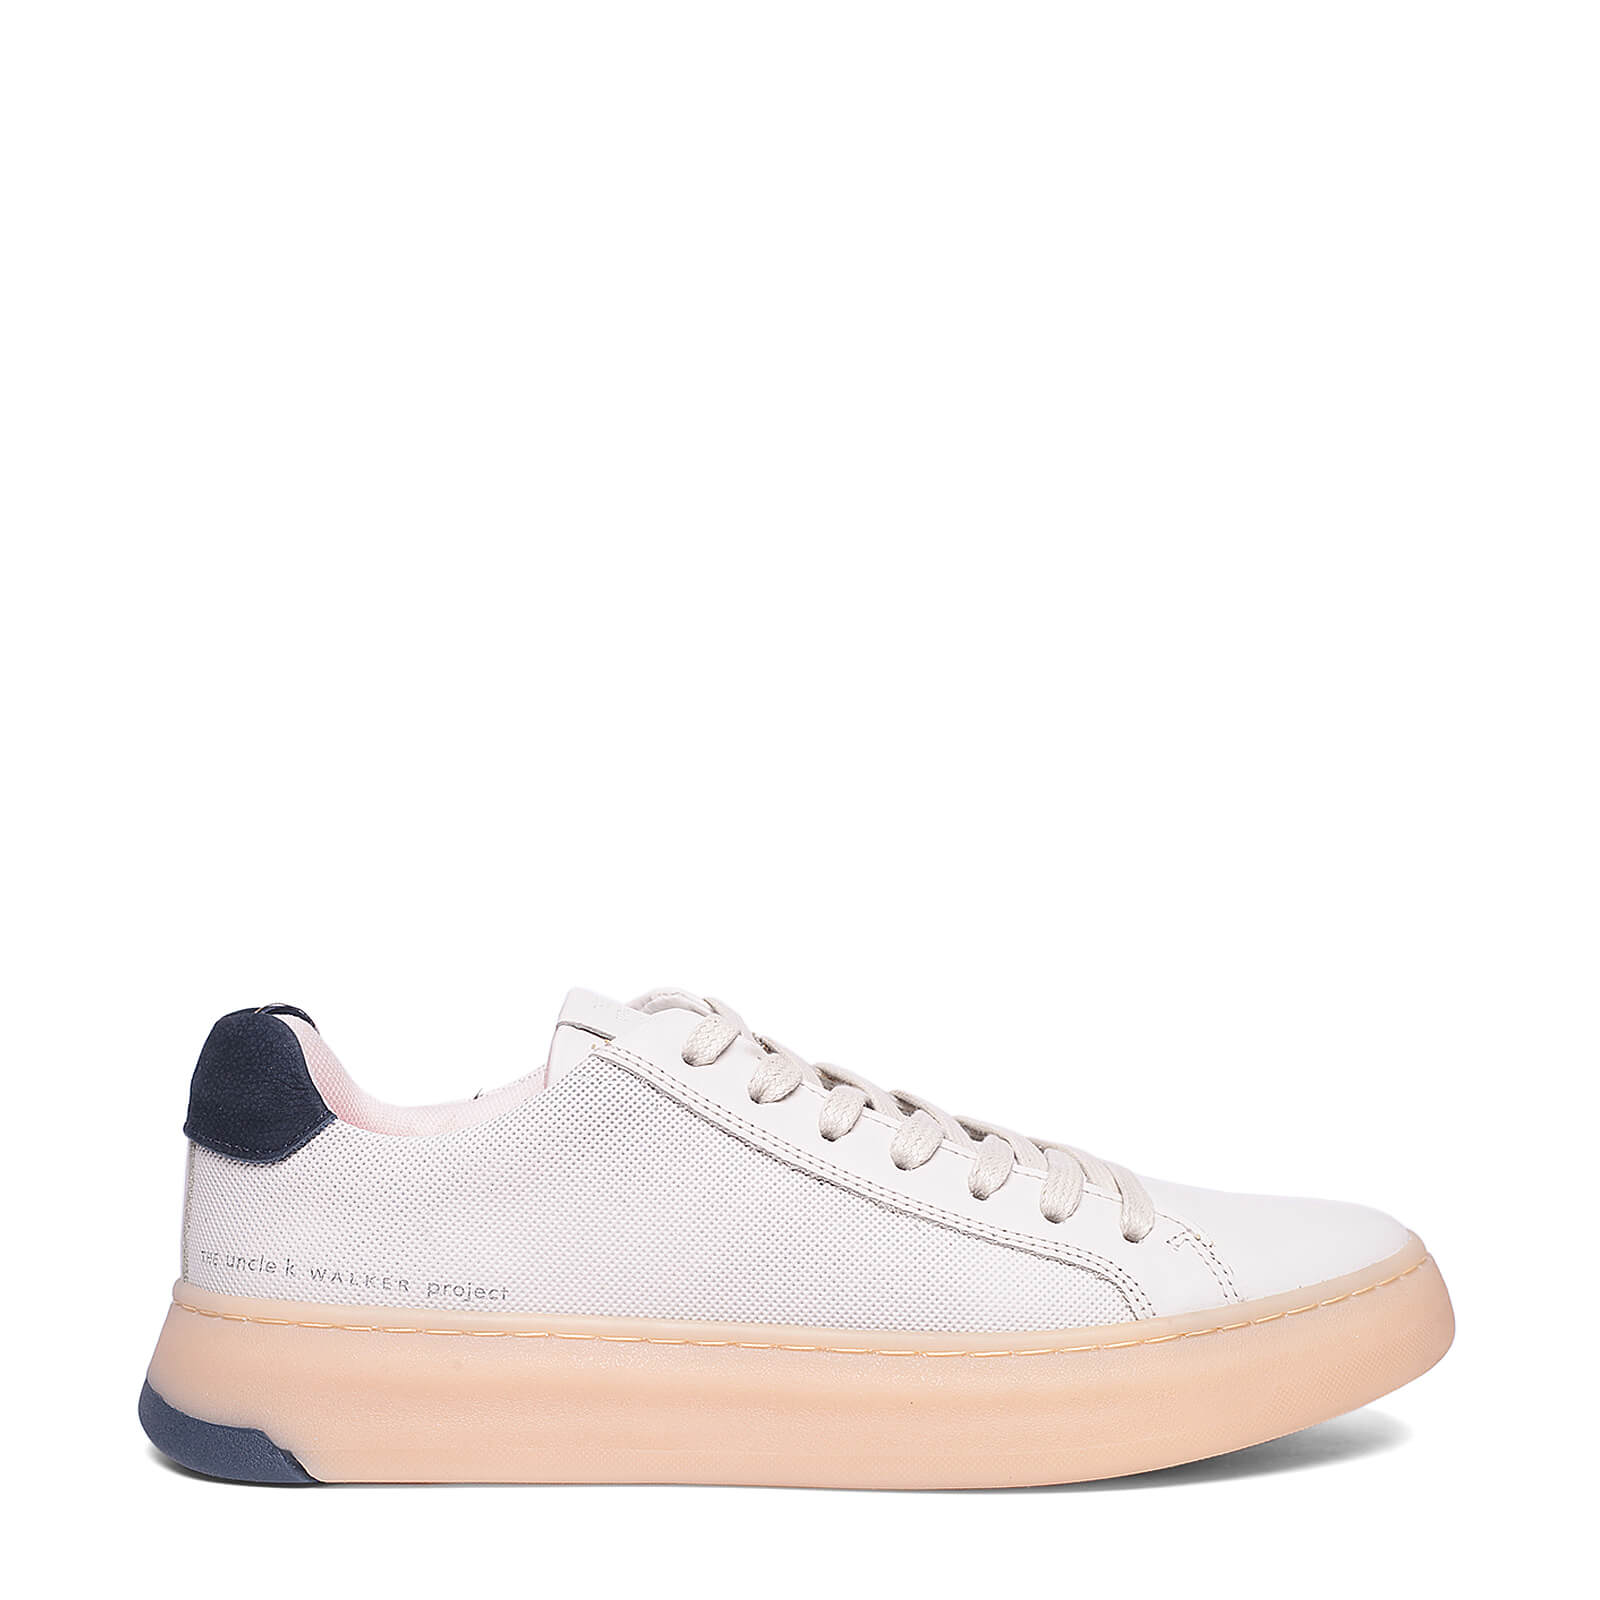 tenis-couro-plat-unclek-off-white-1